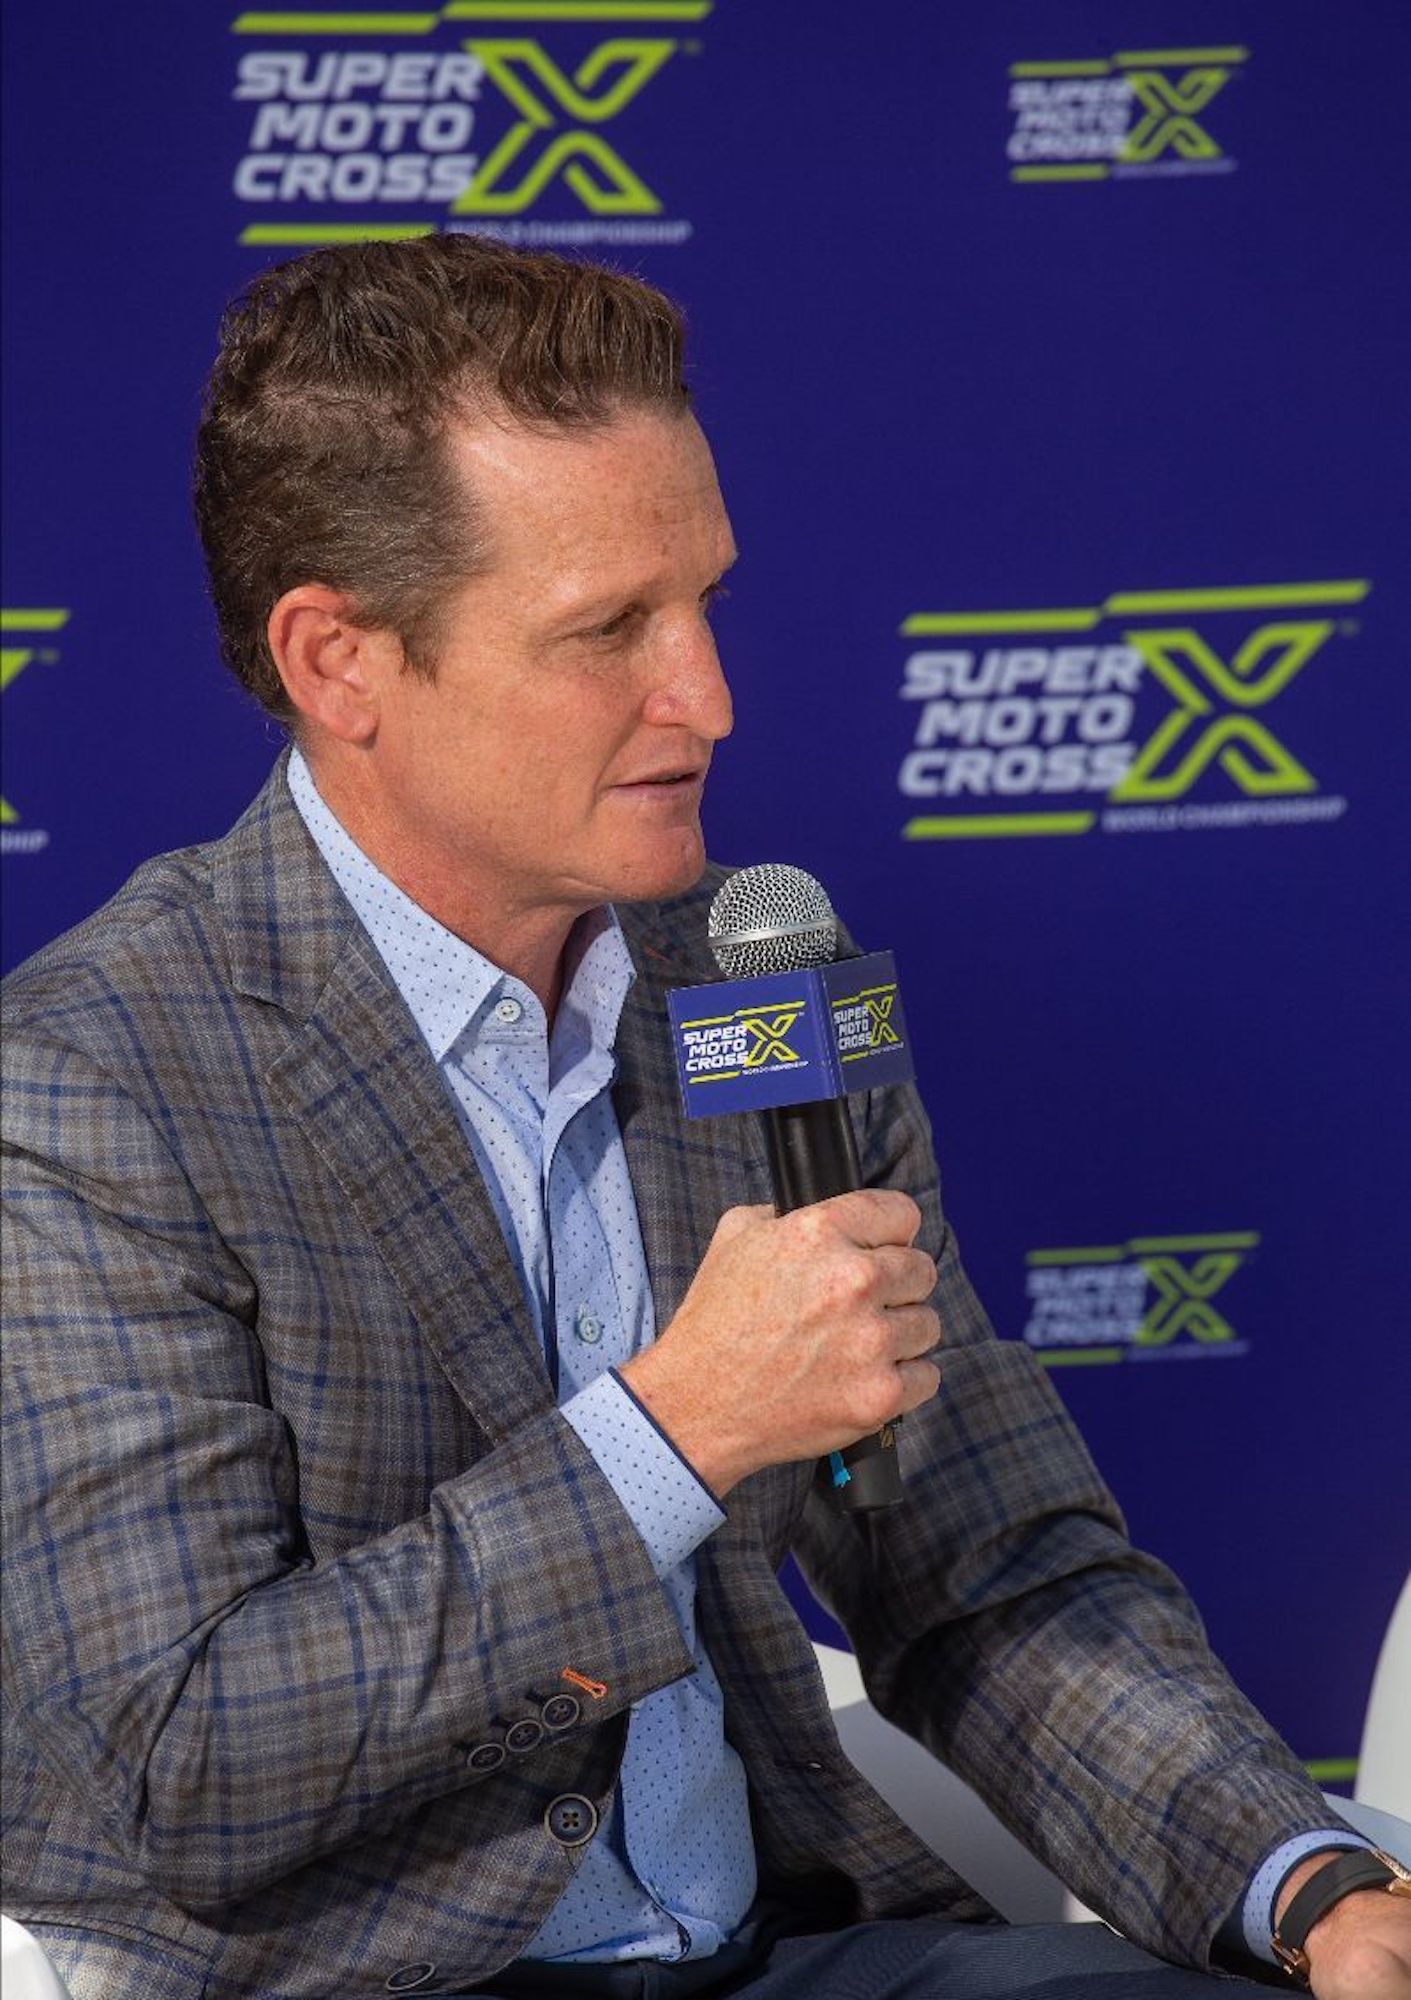 Ricky Carmichael, the man himself. Media sourced from SuperMotocross' recent release.